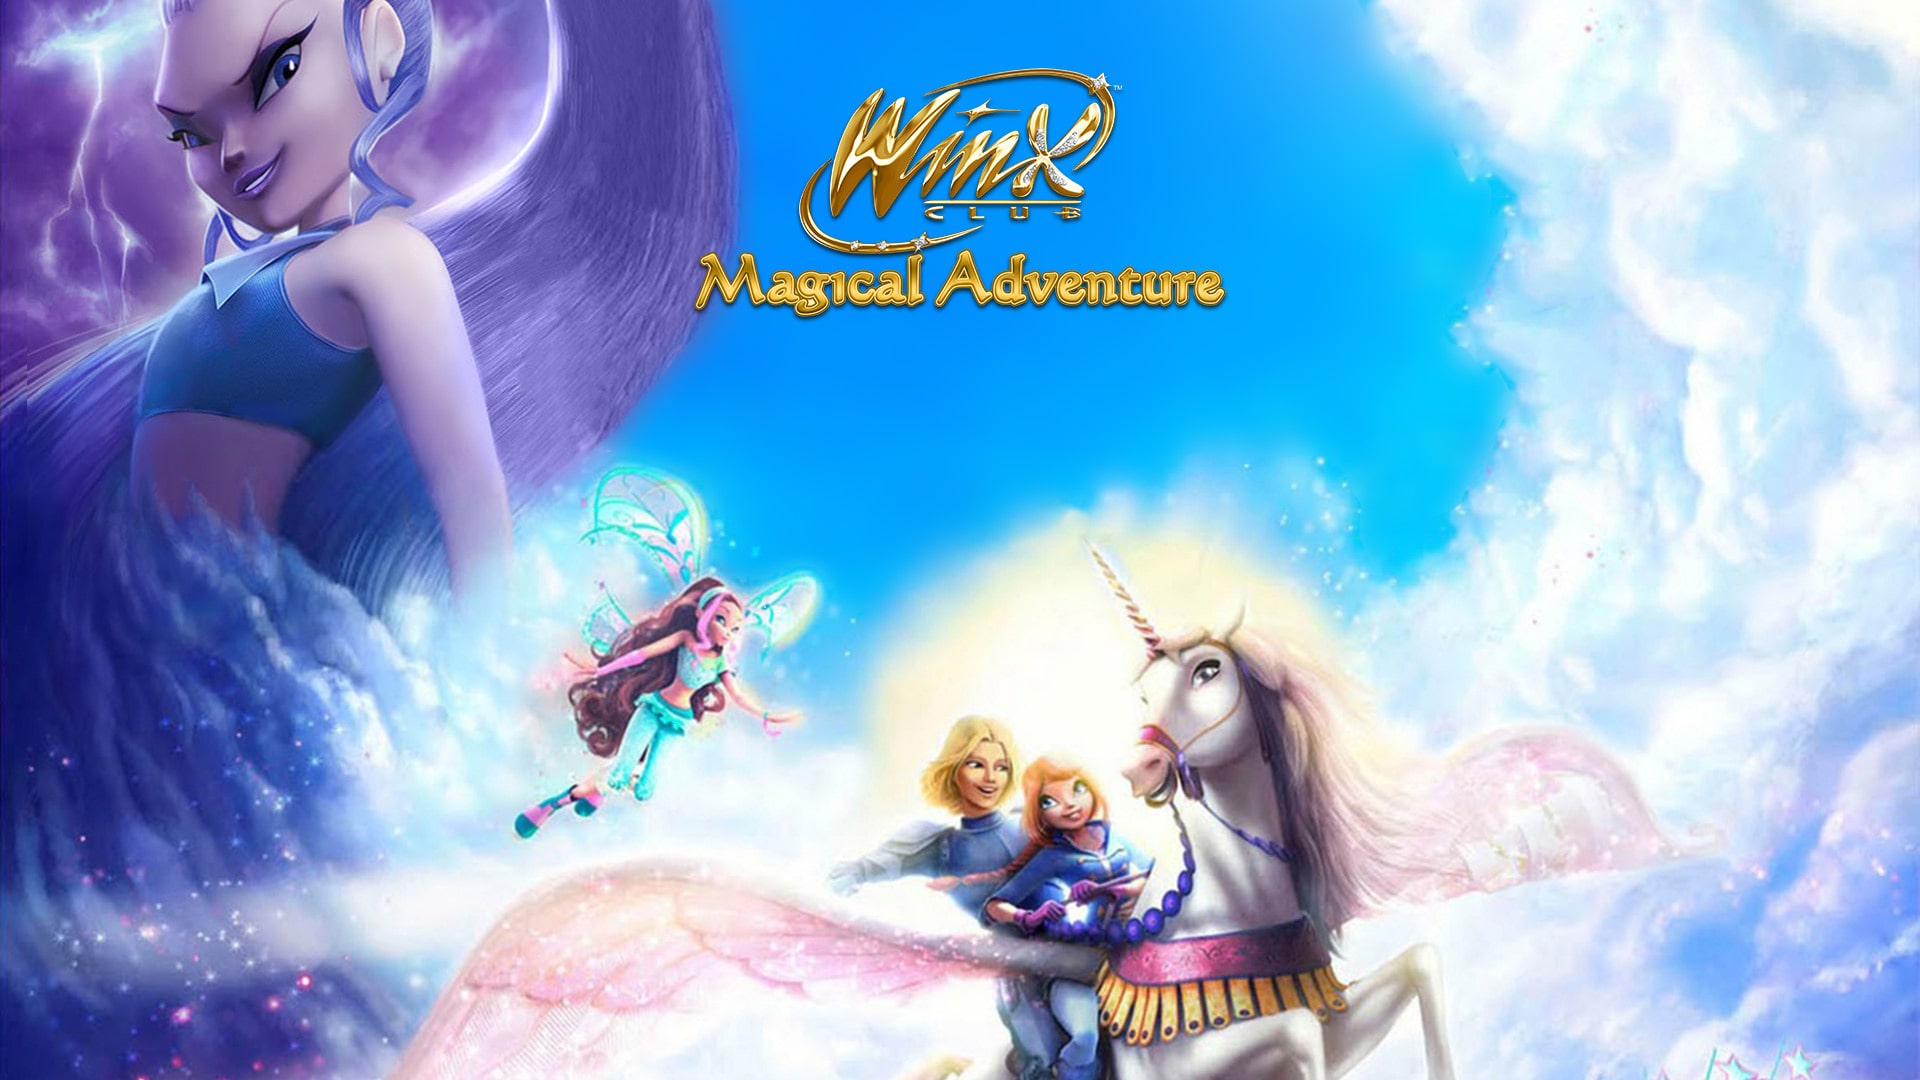 Winx Club: Magical Adventure Full Movie Hindi Dubbed Download